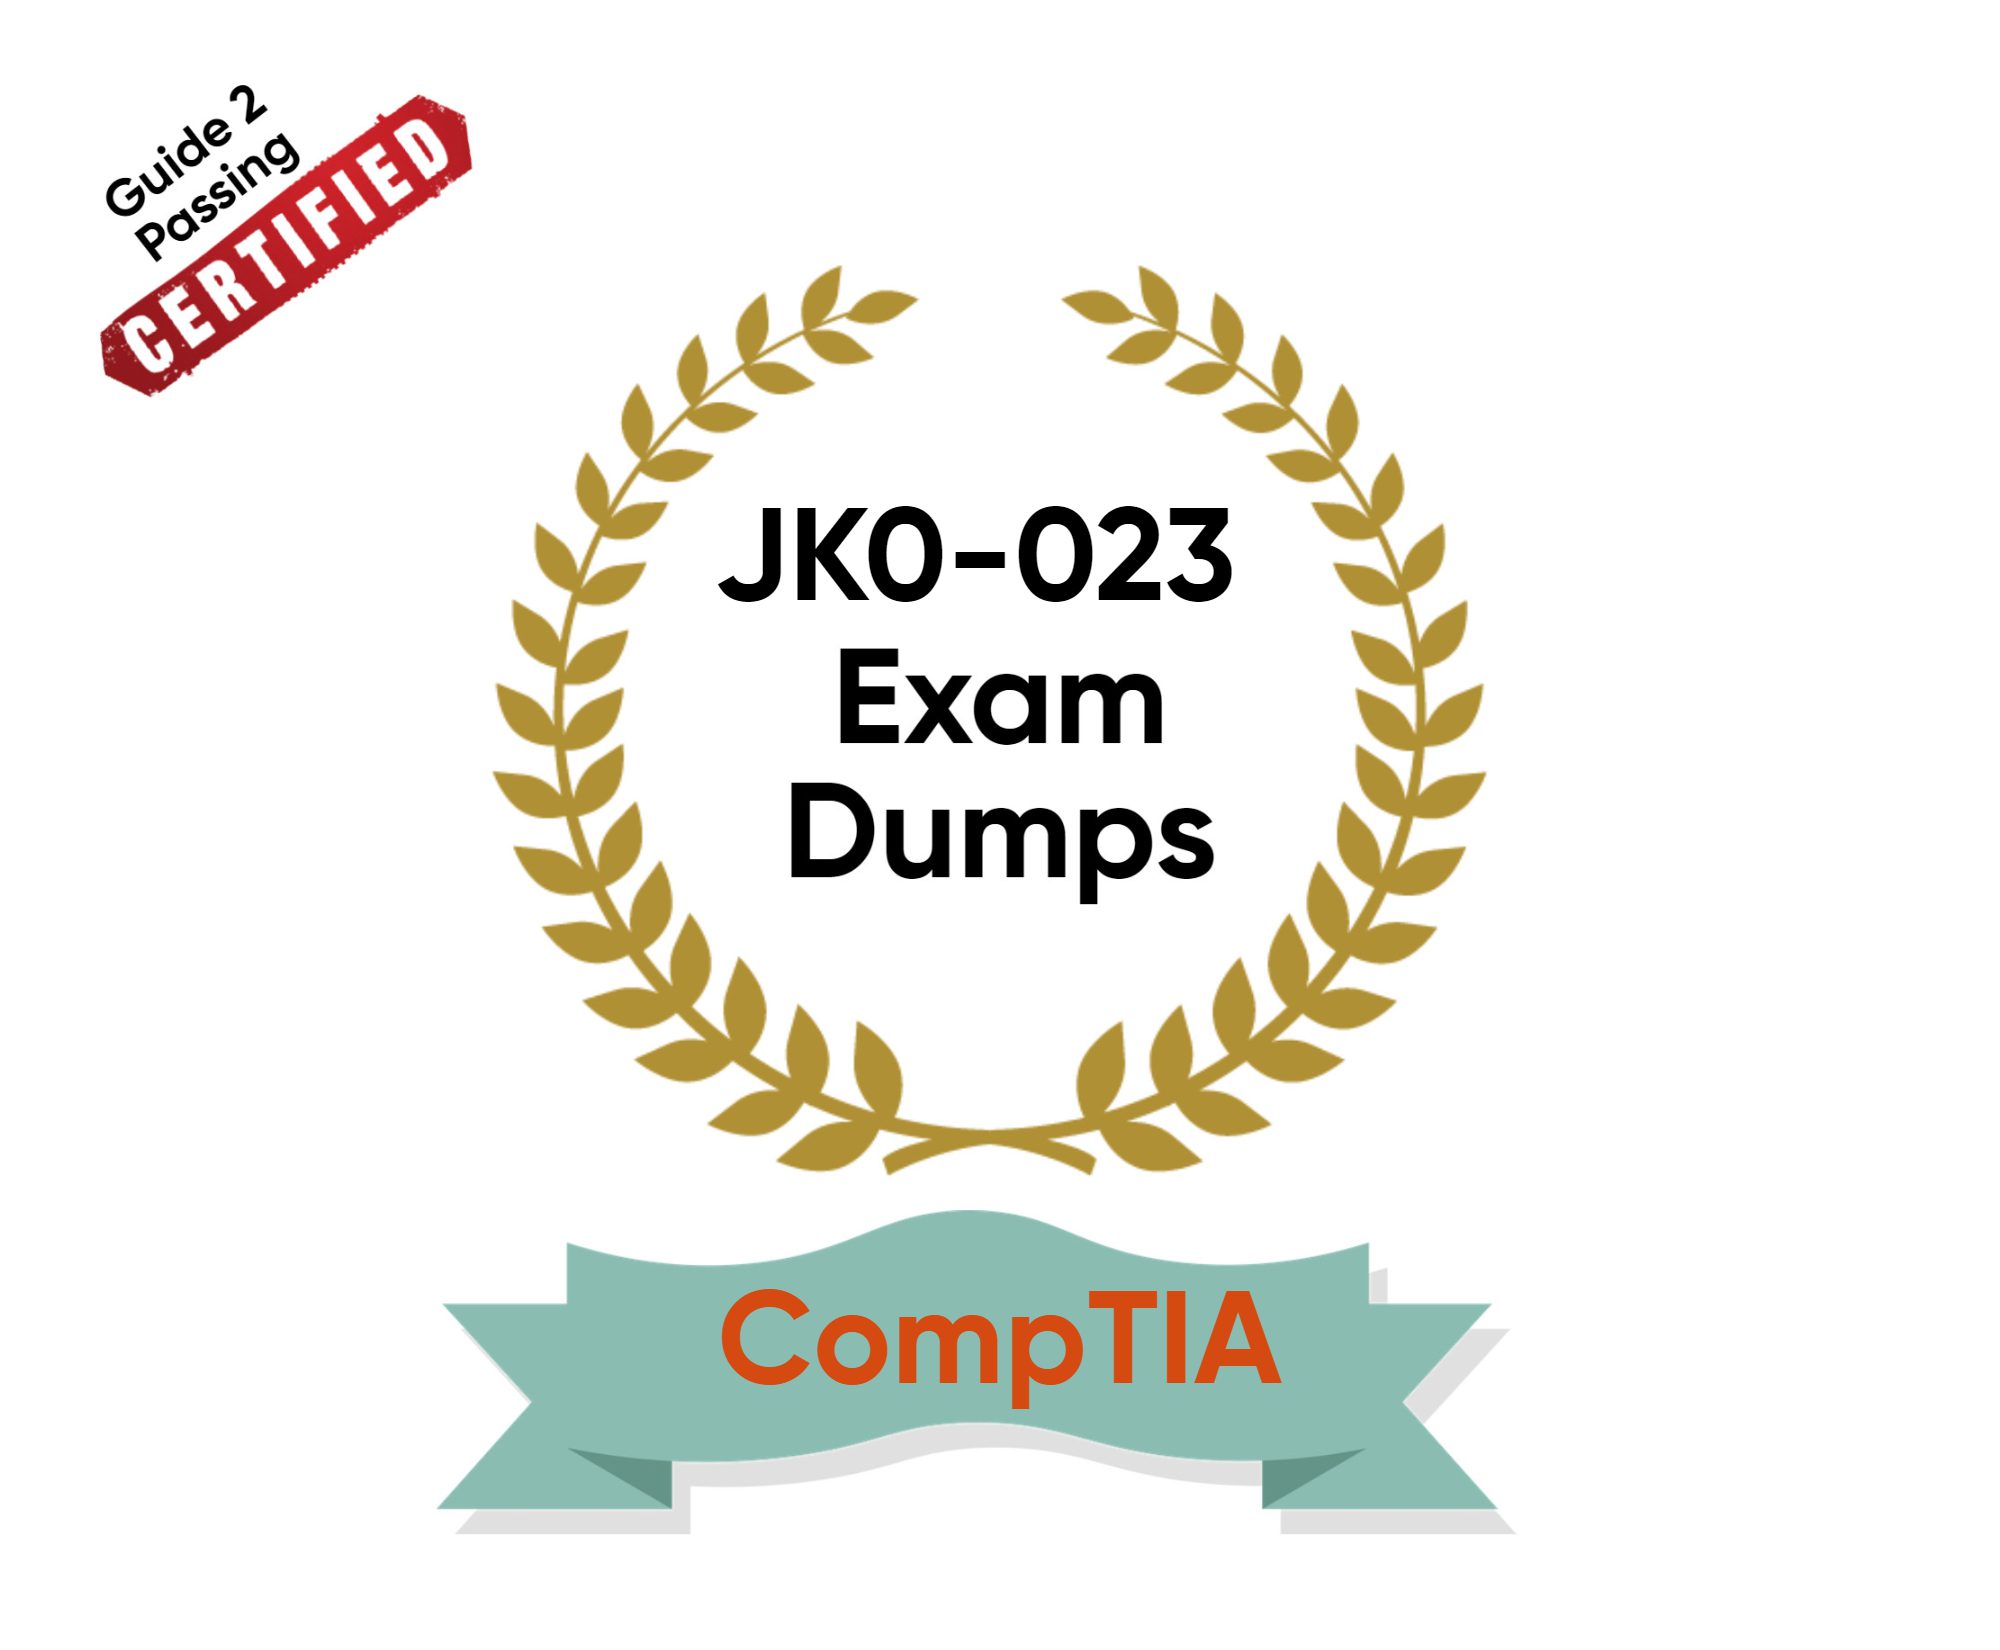 Pass Your CompTIA JK0-023 Exam Dumps From Guide 2 Passing